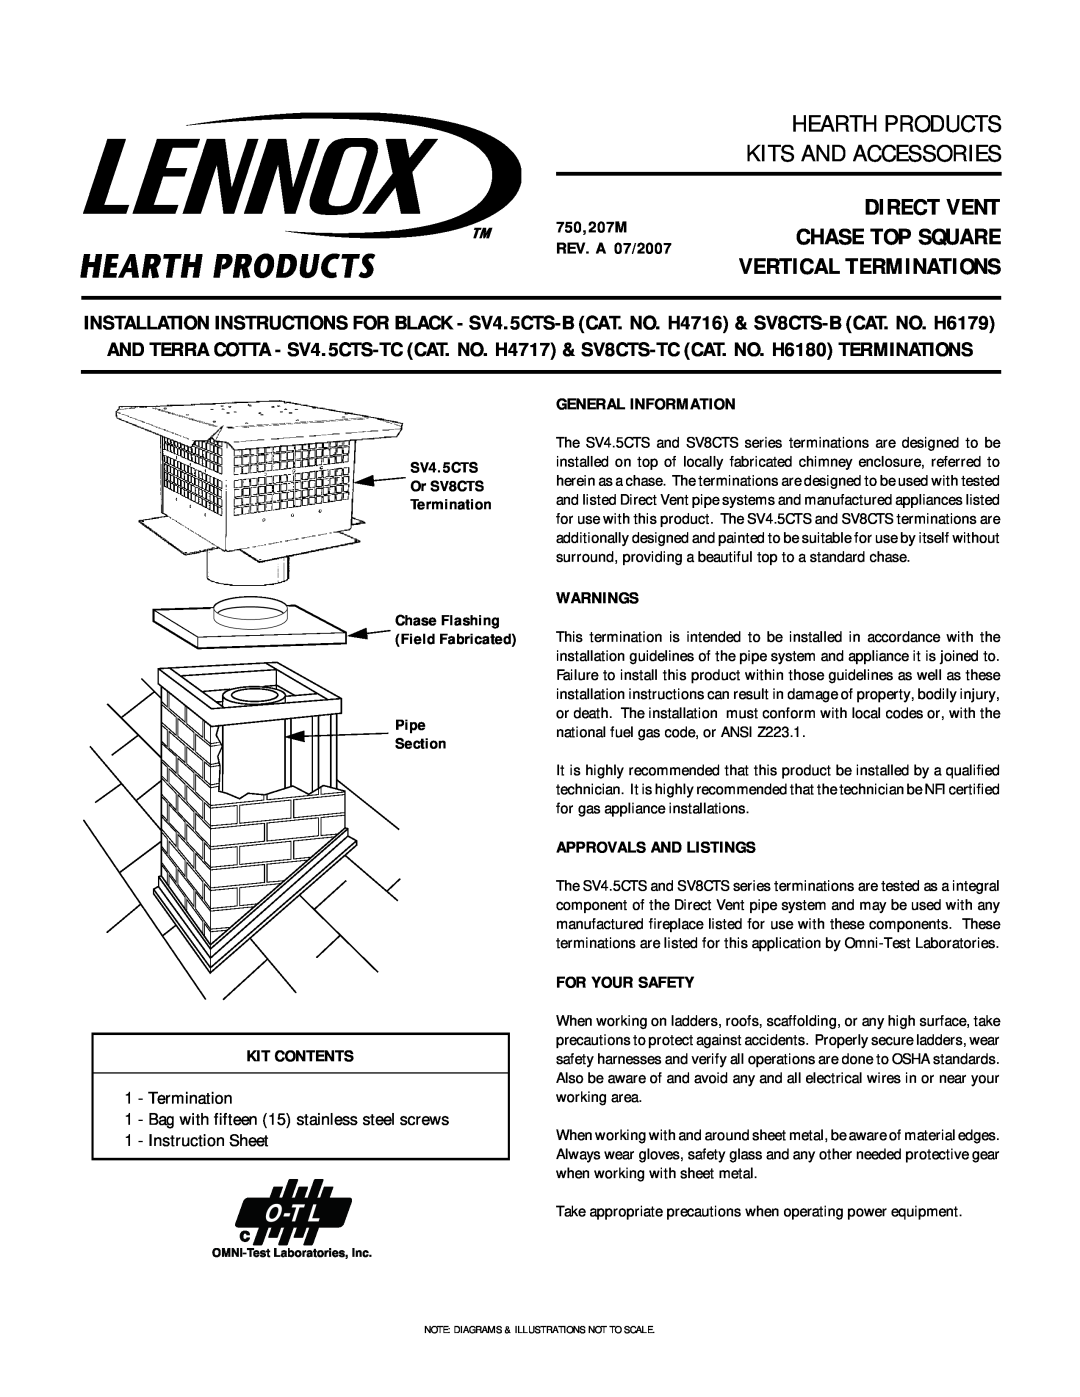 Lennox Hearth SV8CTS series instruction sheet 750,207M REV. A 07/2007, SV4.5CTS Or SV8CTS Termination, General Information 